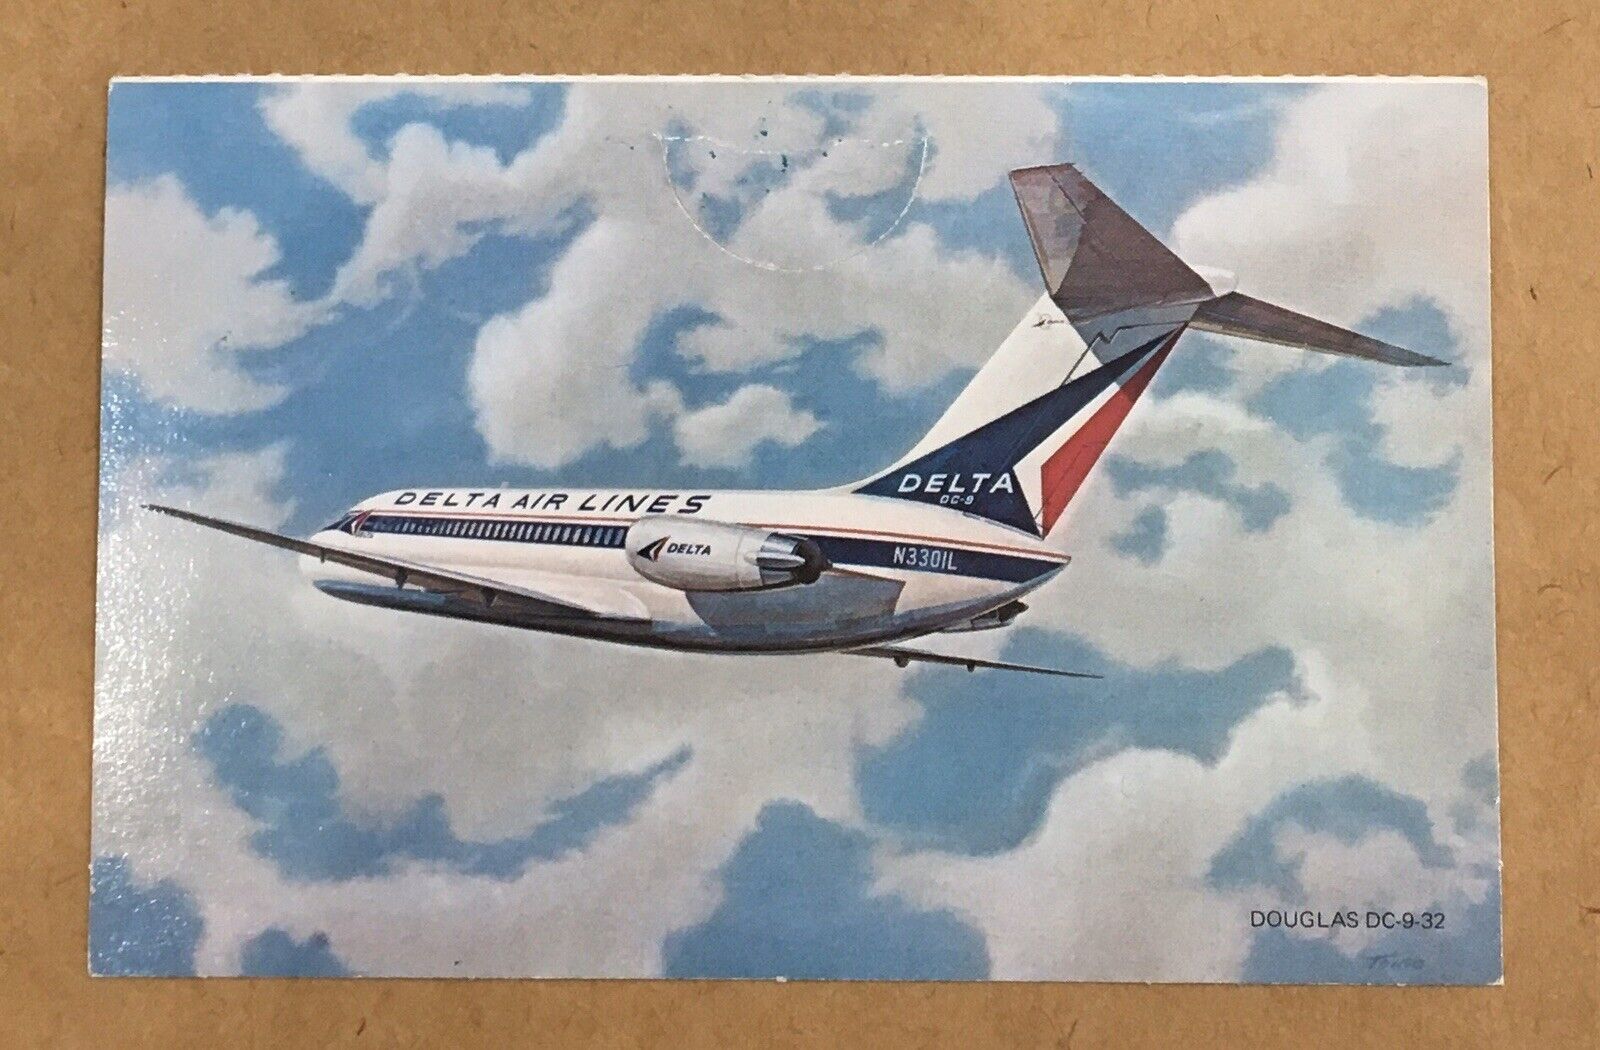 Delta Airlines Promotional Card For Douglas DC-9-32 Airplane, 5.5” x 3.5